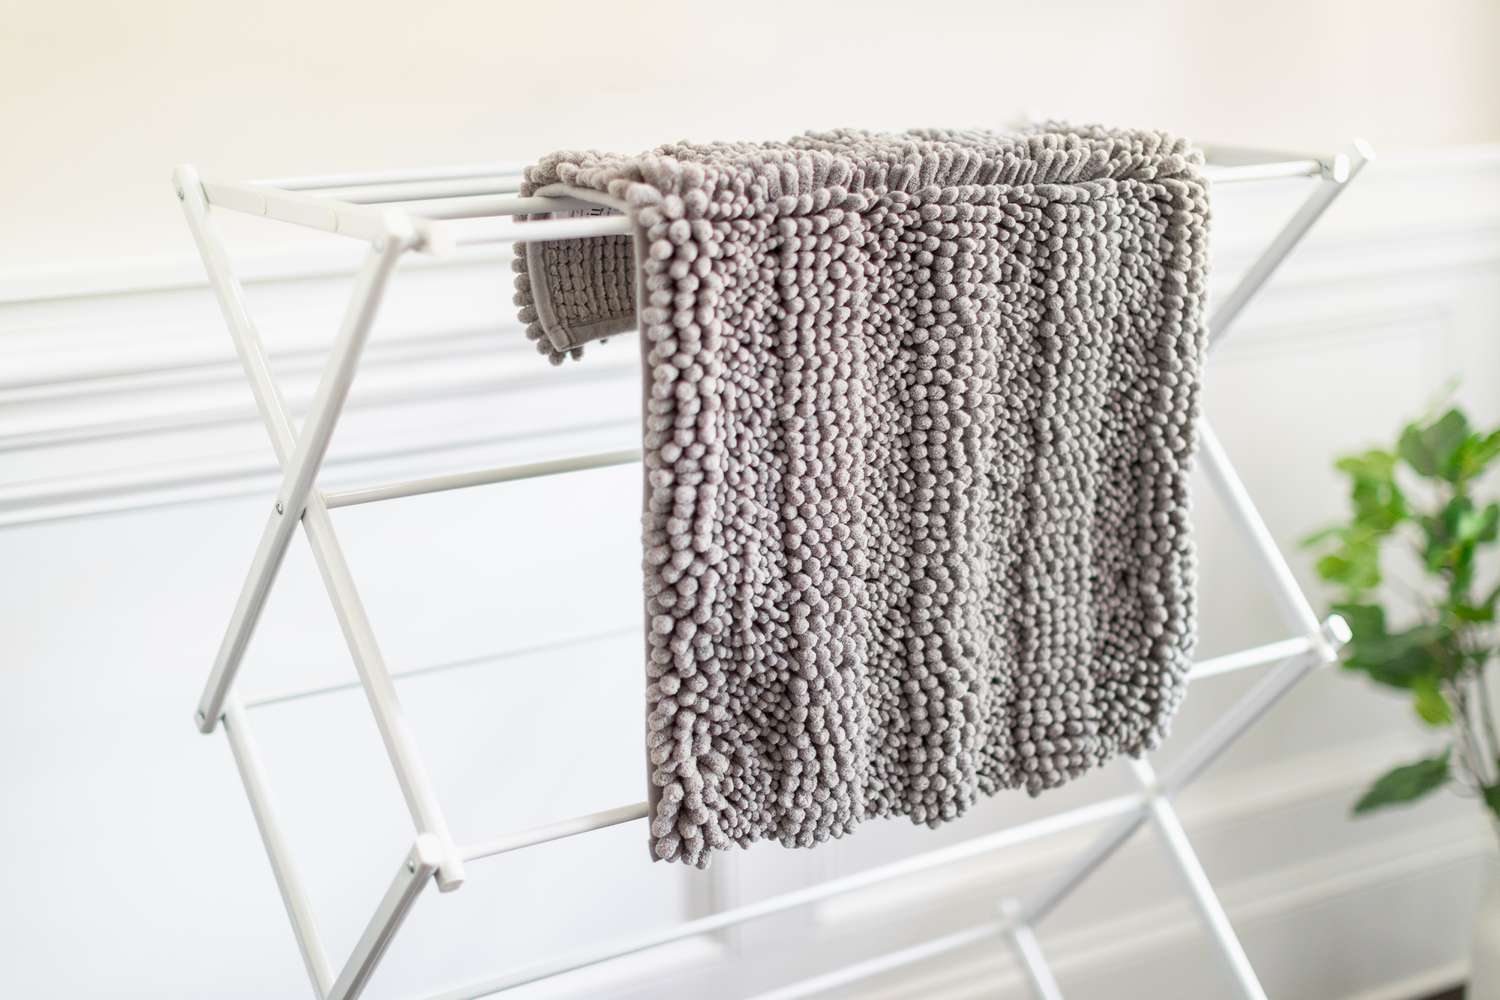 How Often Should You Wash Your Bath Mat